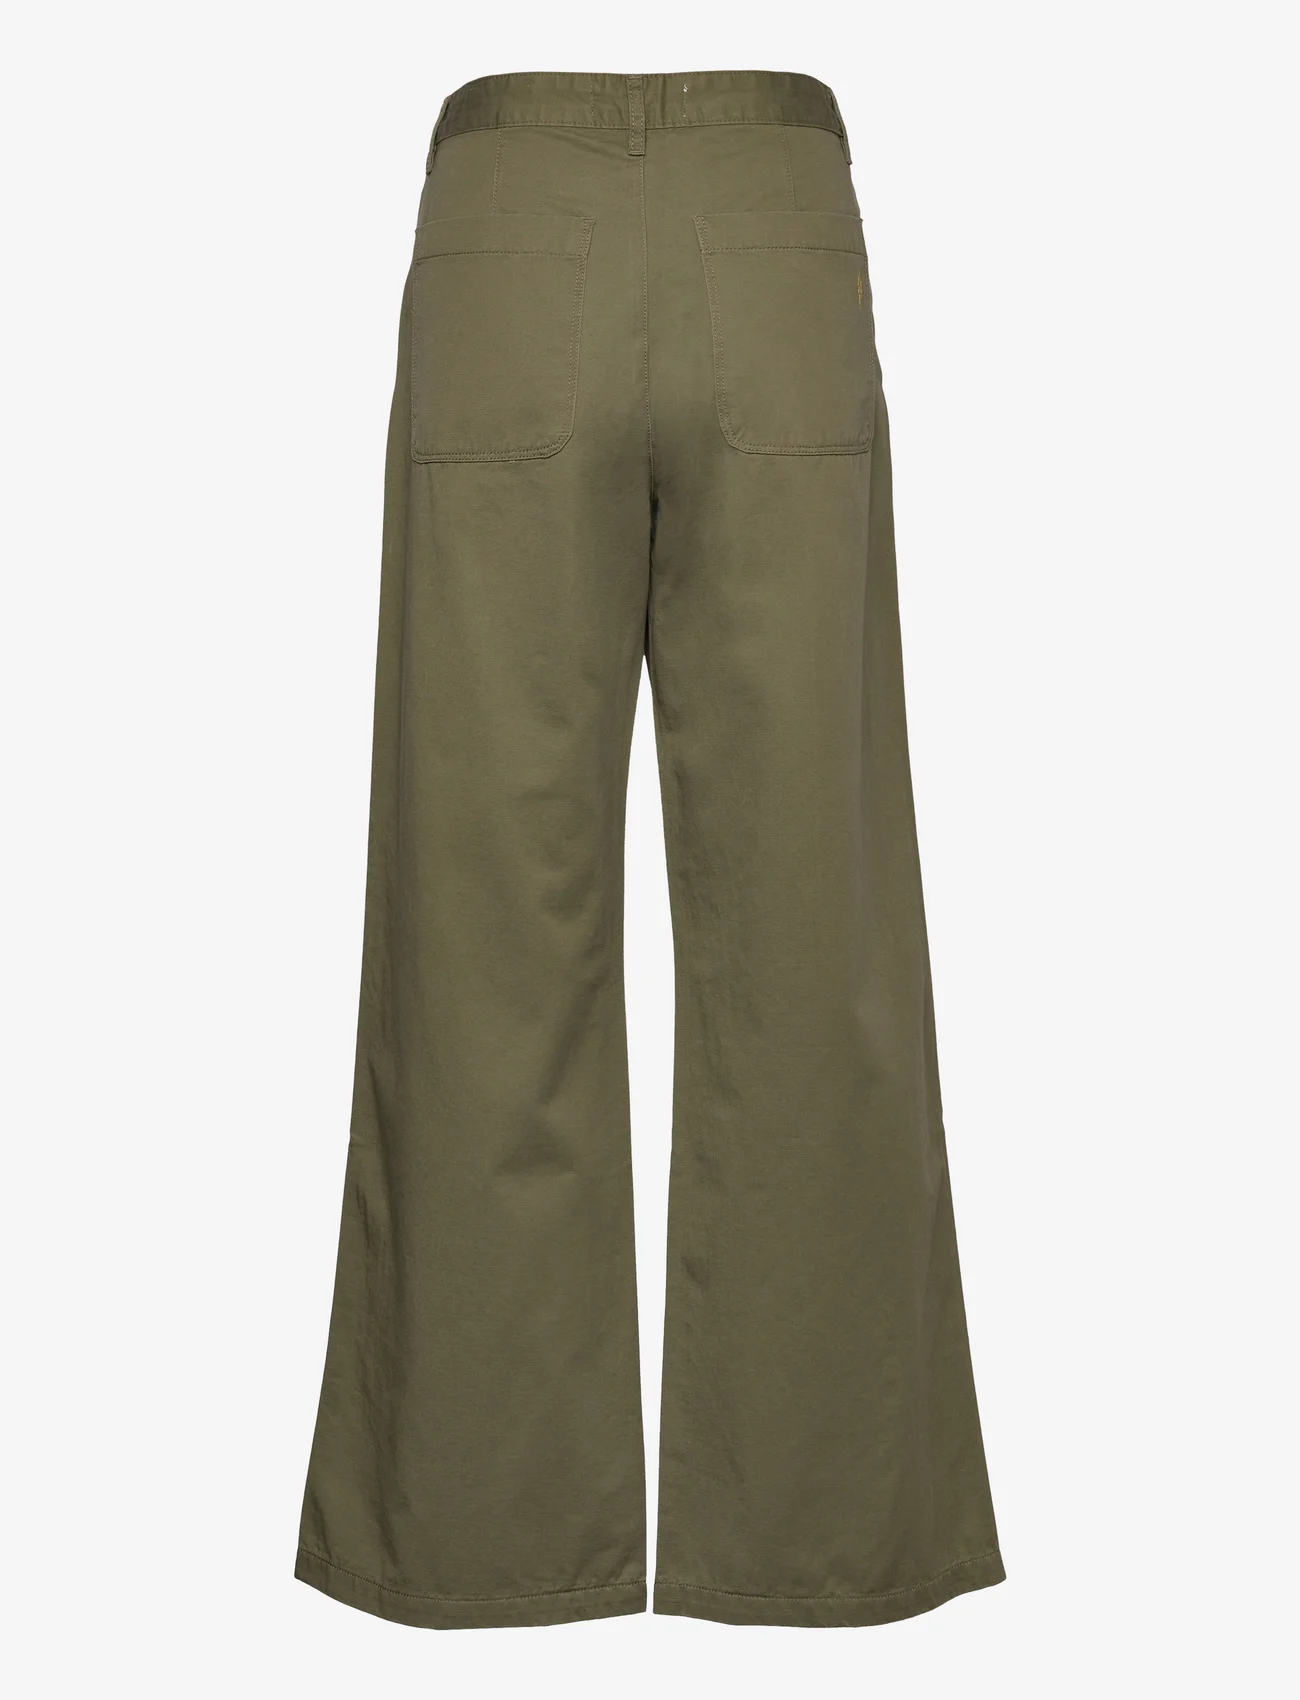 Sofie Schnoor - Trousers - chinos - army green - 1